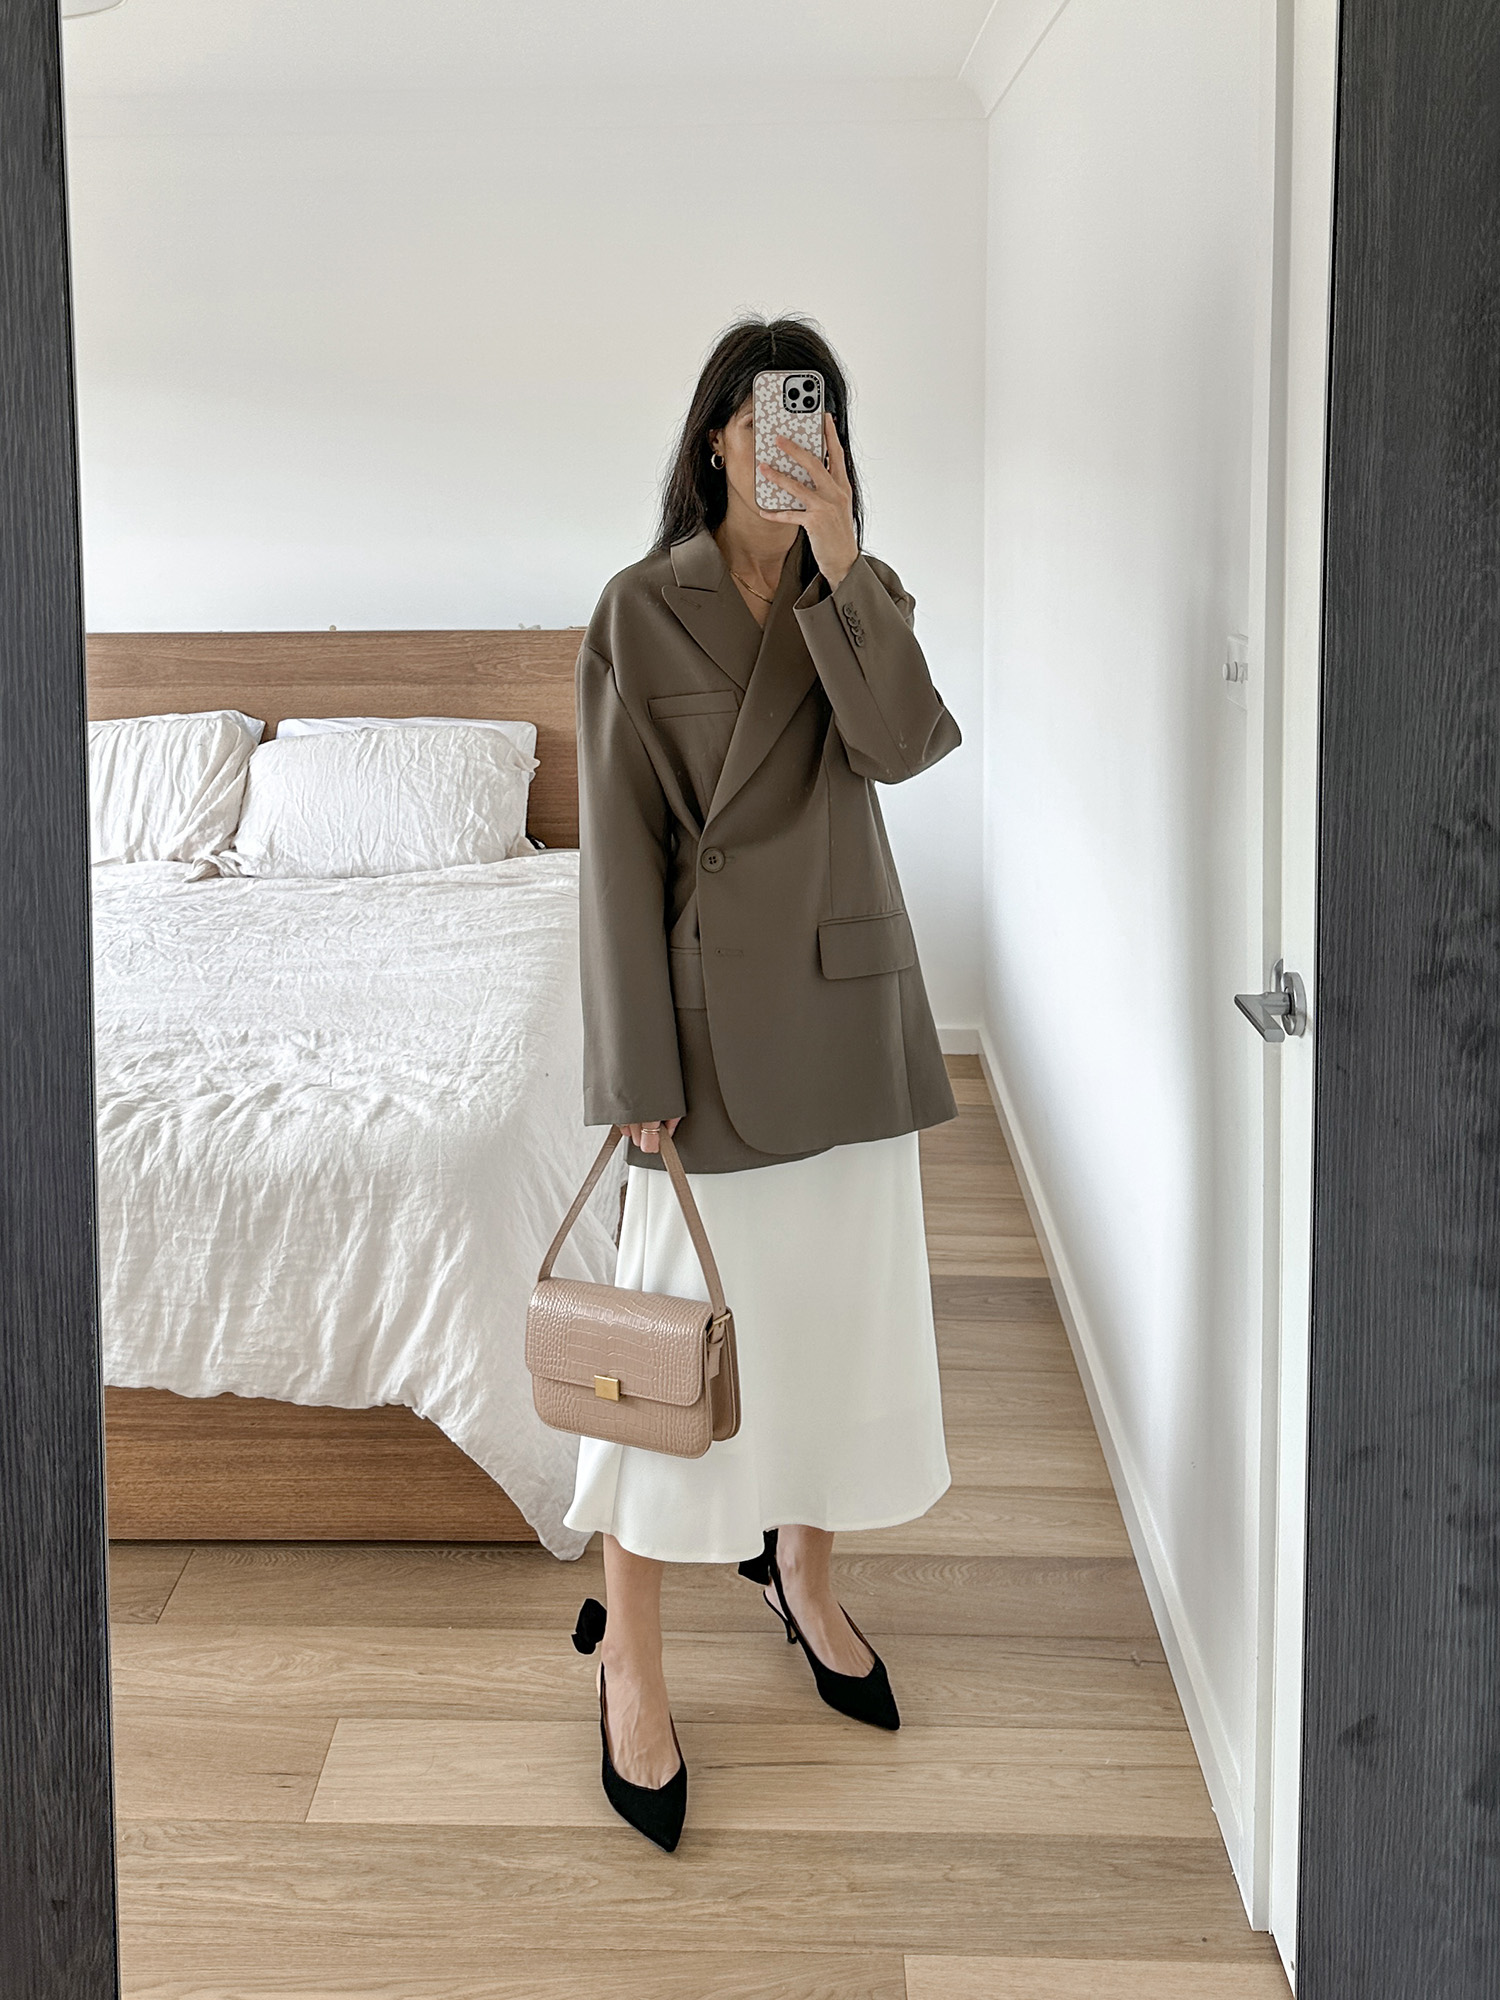 Tibi Liam blazer with The Curated shoulder bag